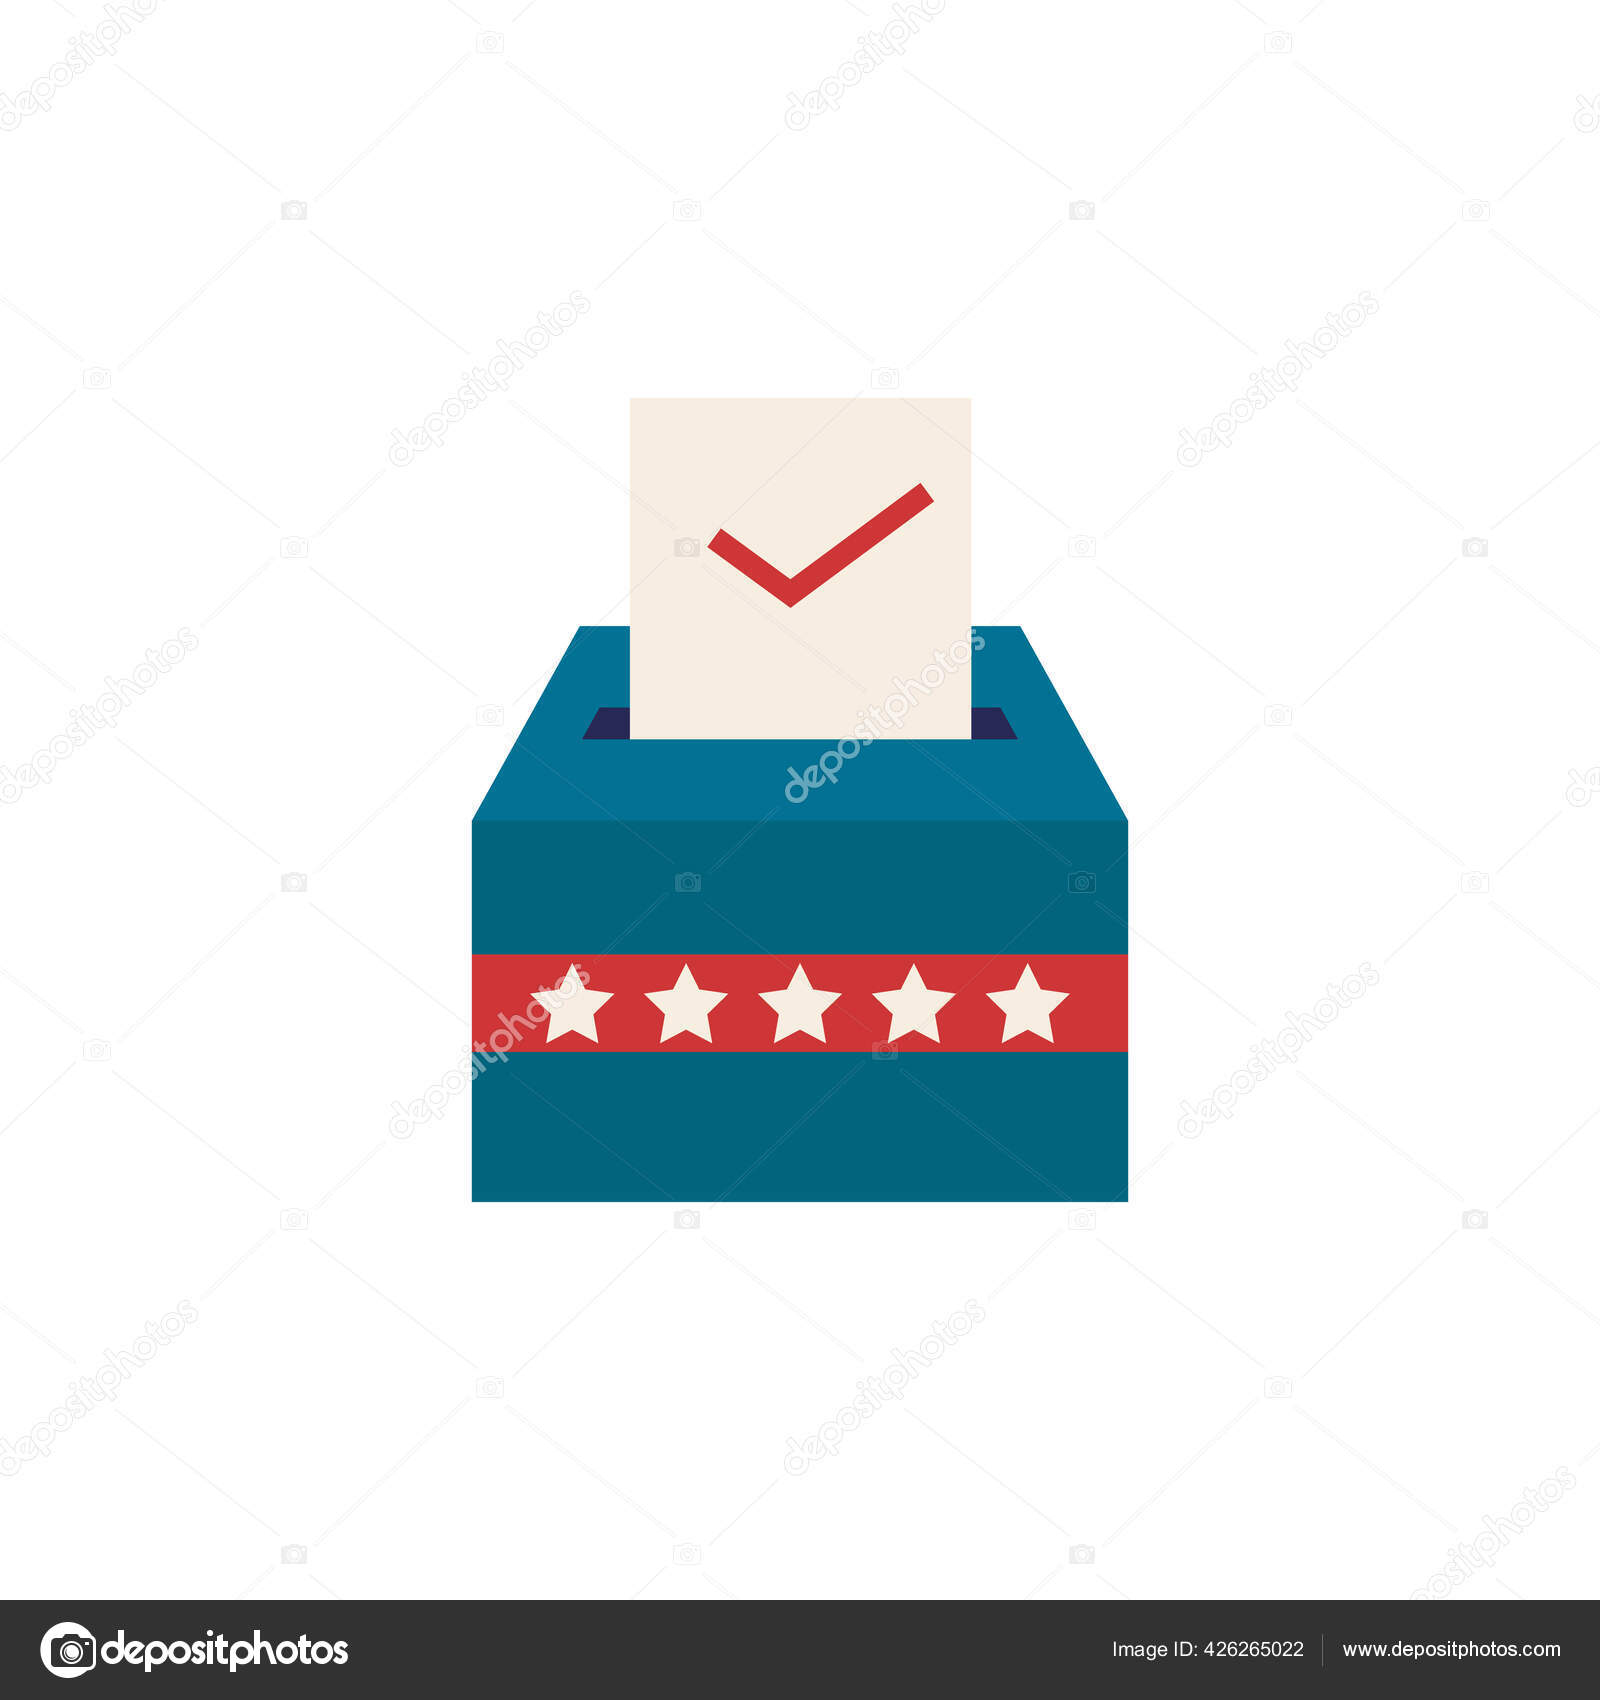 Vote Icon Simple Illustration Election Collection Monochrome Vote Icon Web Vector Image By C Simakovavector Vector Stock